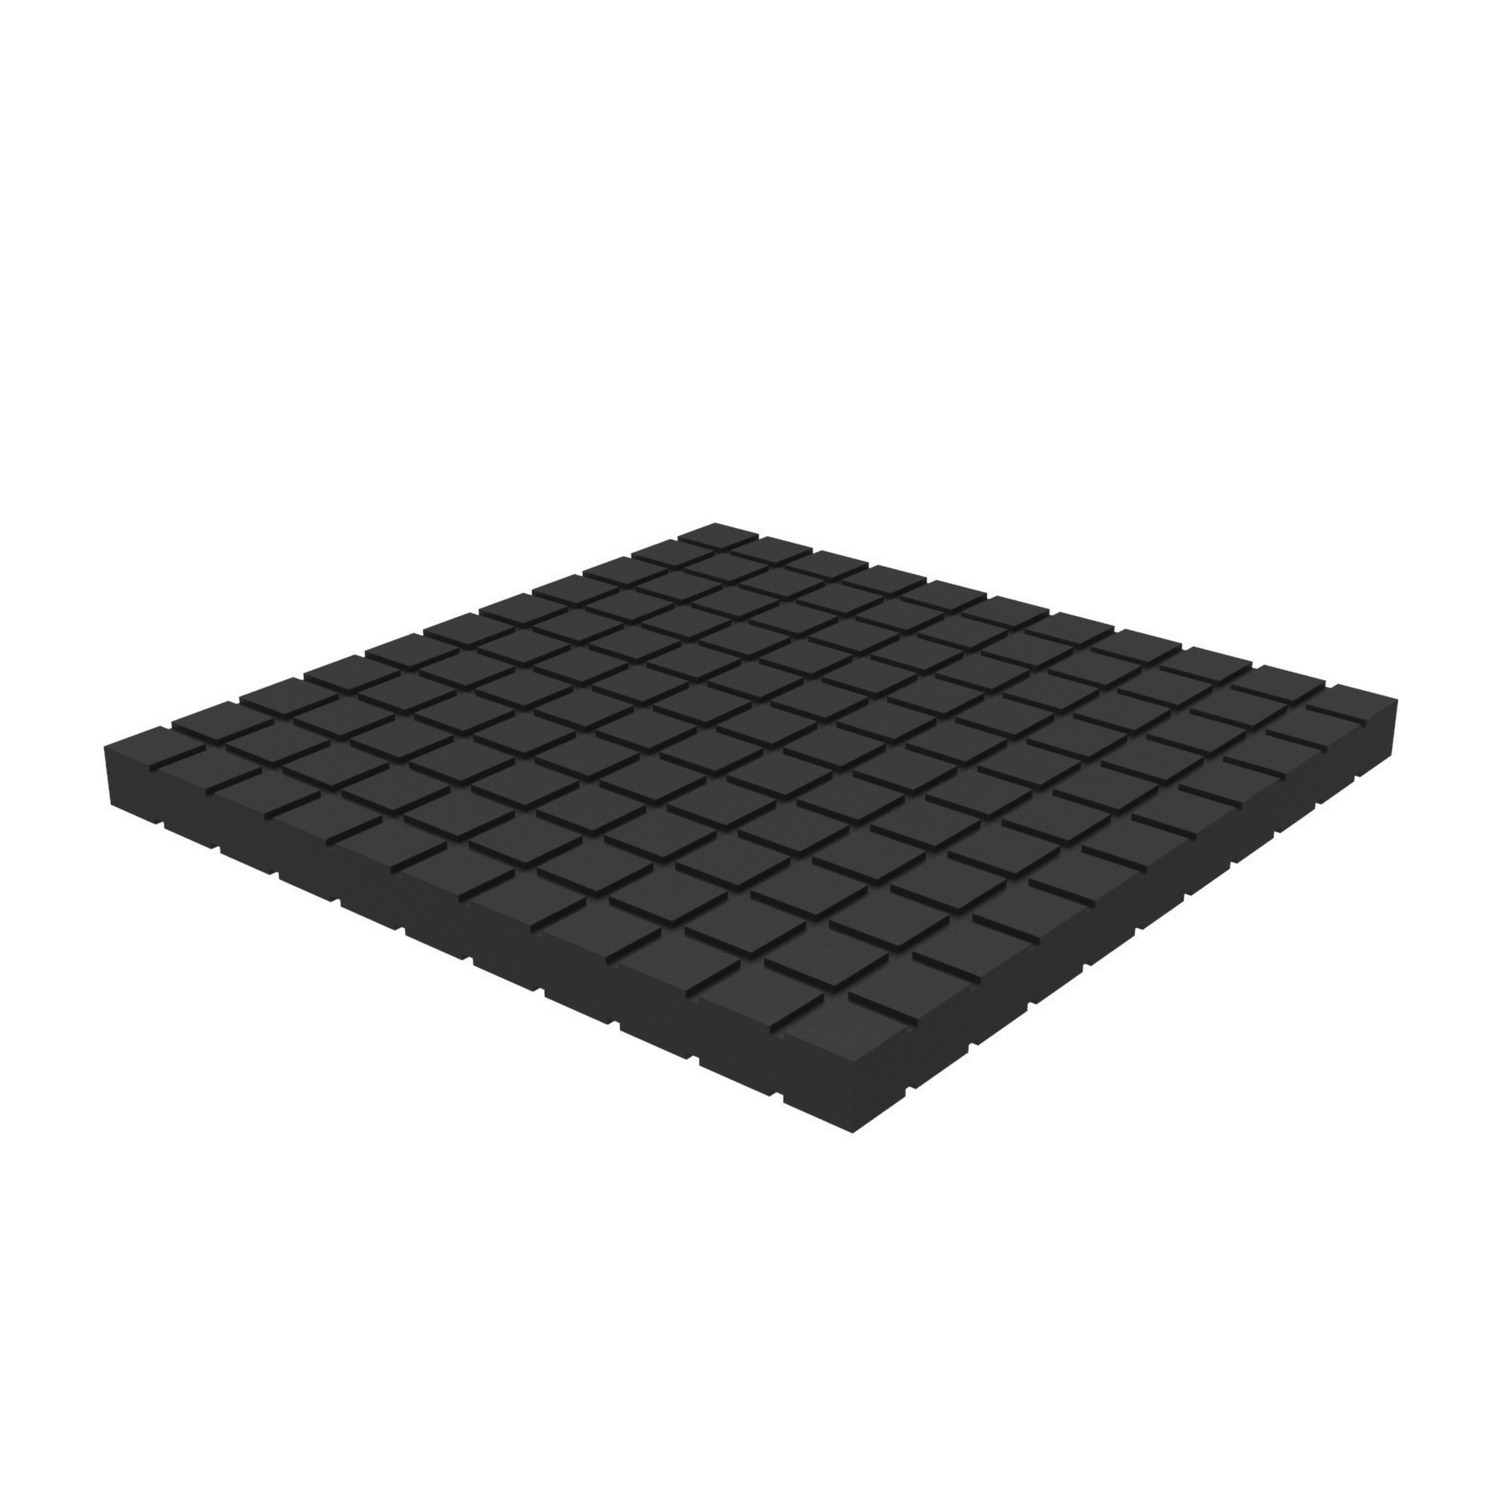 Anti-vibration Pads Anti-vibration pads absorb shock. Available in rectangular, round and flanged. View our full range today.